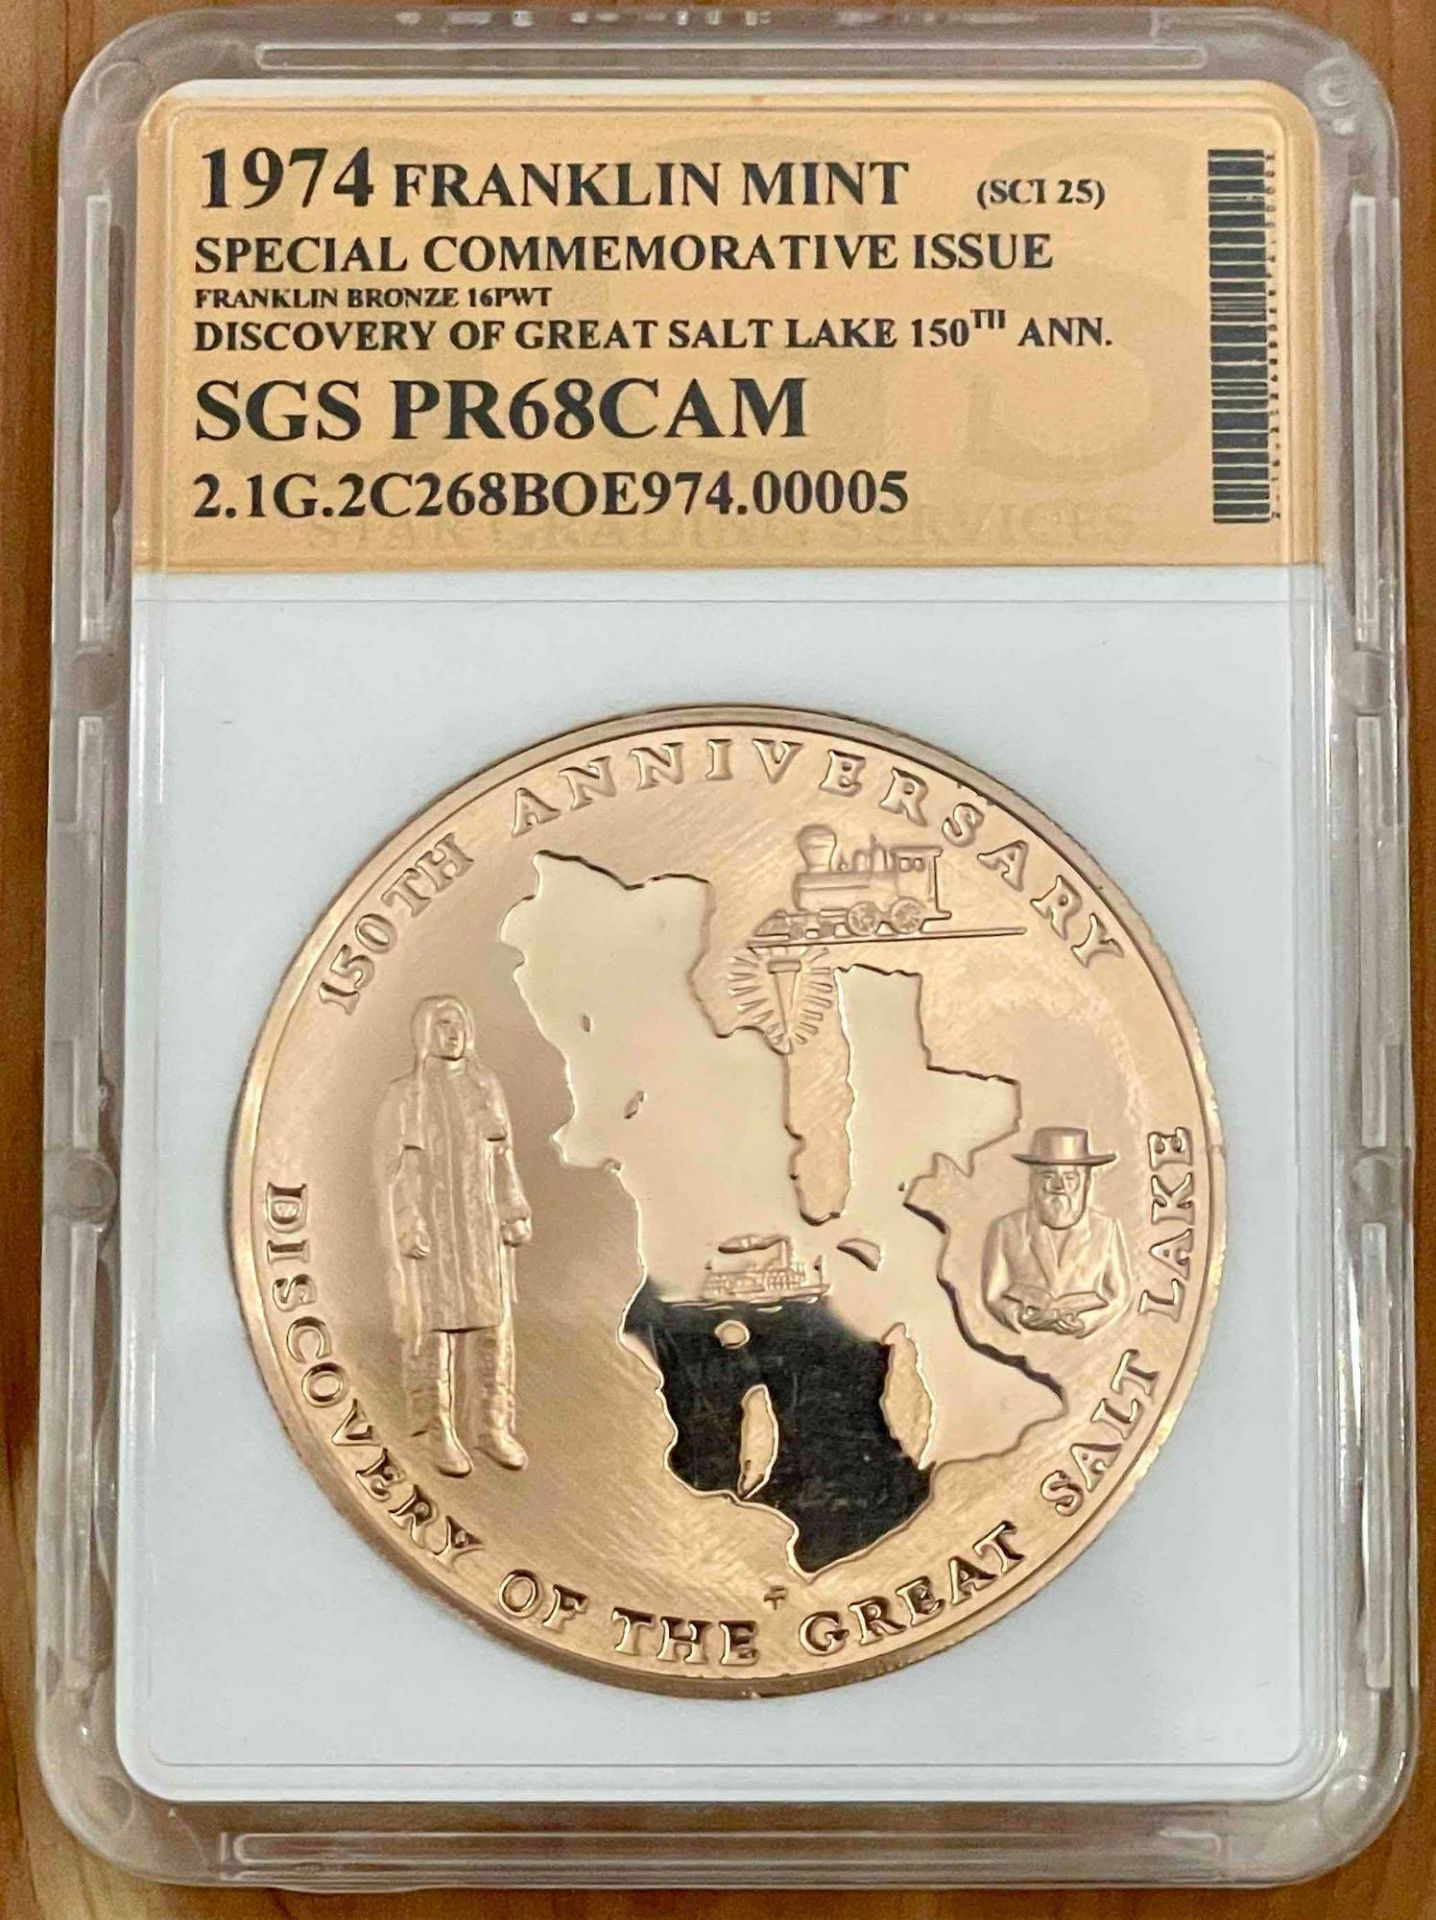 Rare 1974 Discovery of Great Salt Lake 150th Anniversary PR68 & Powell Expedition 100th Anniversary - Image 2 of 5